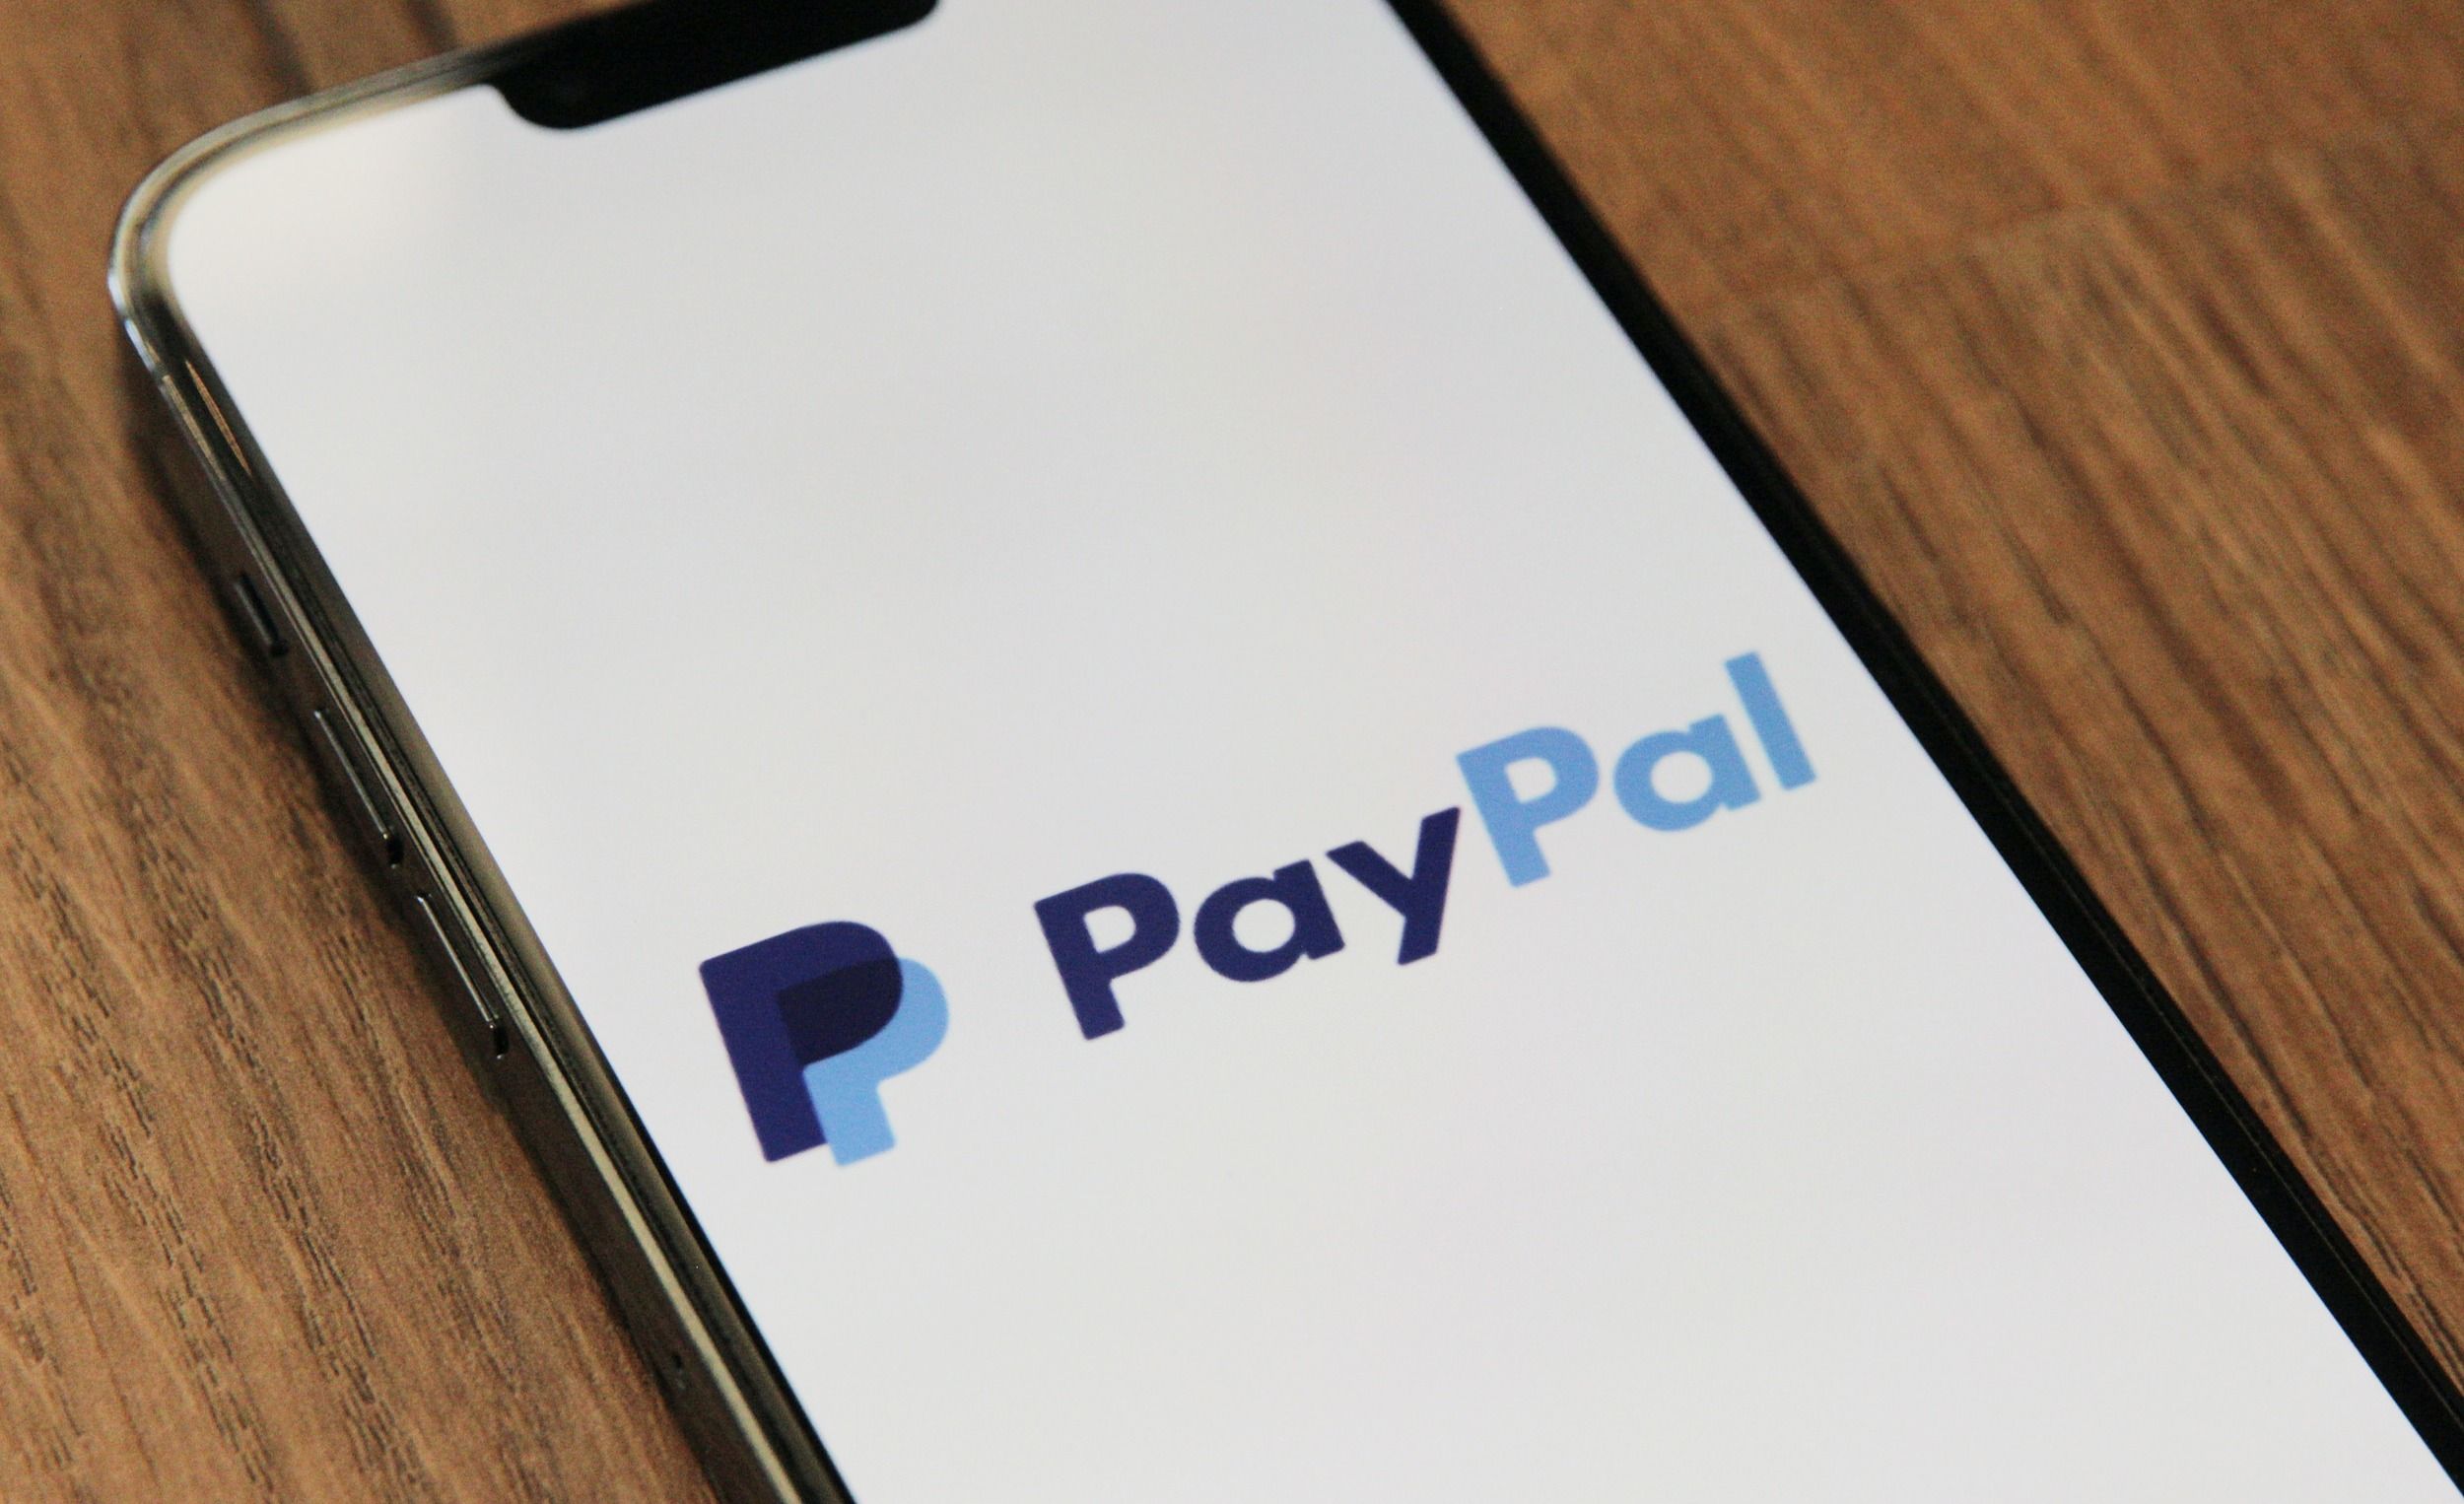 The PayPal logo on a phone screen